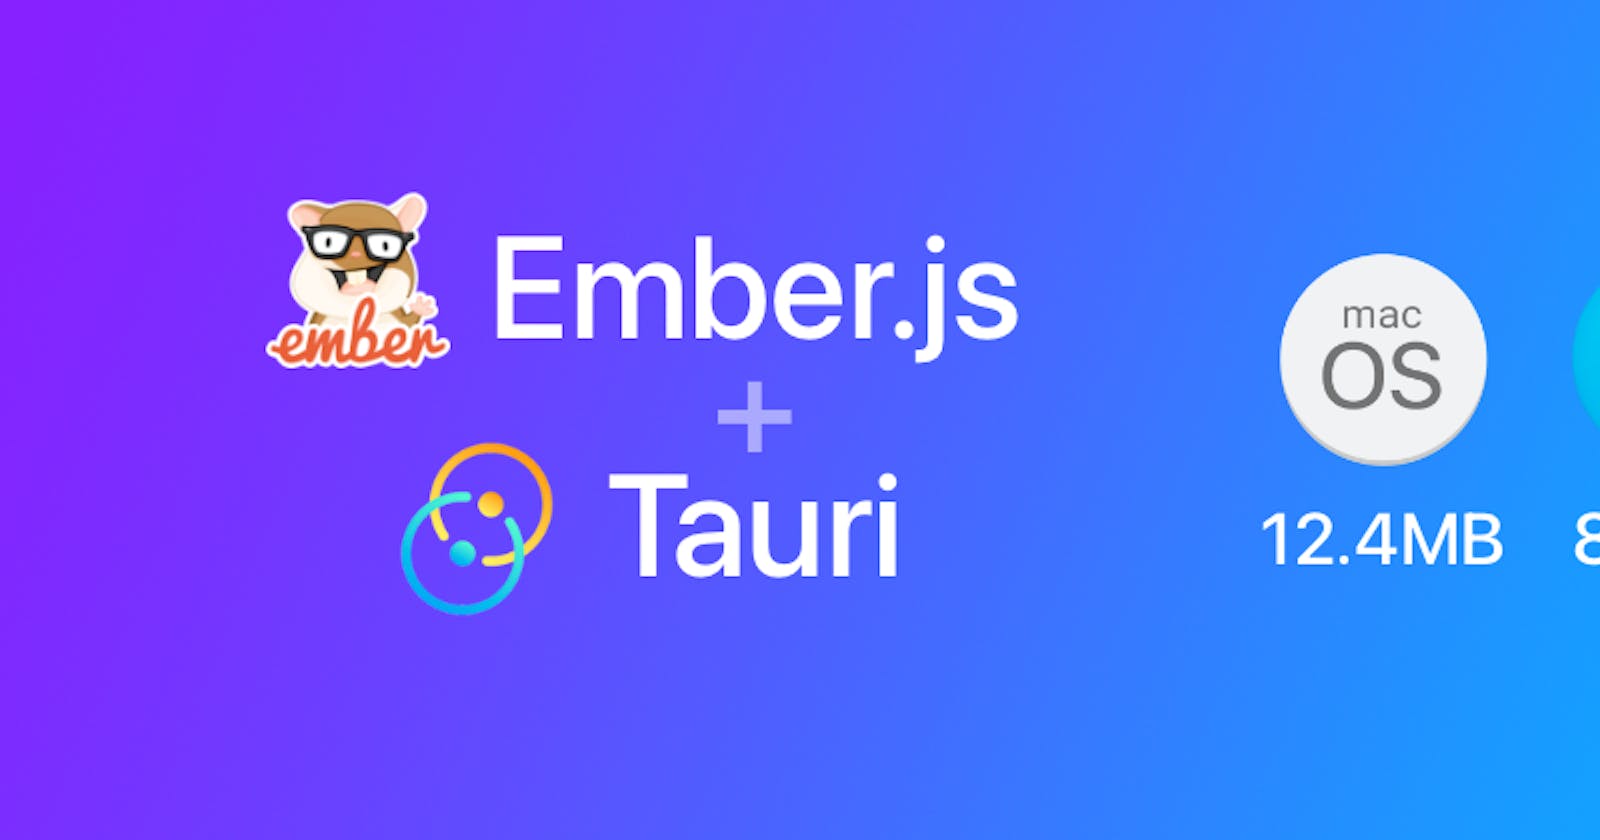 Building small desktop apps with Ember.js and Tauri